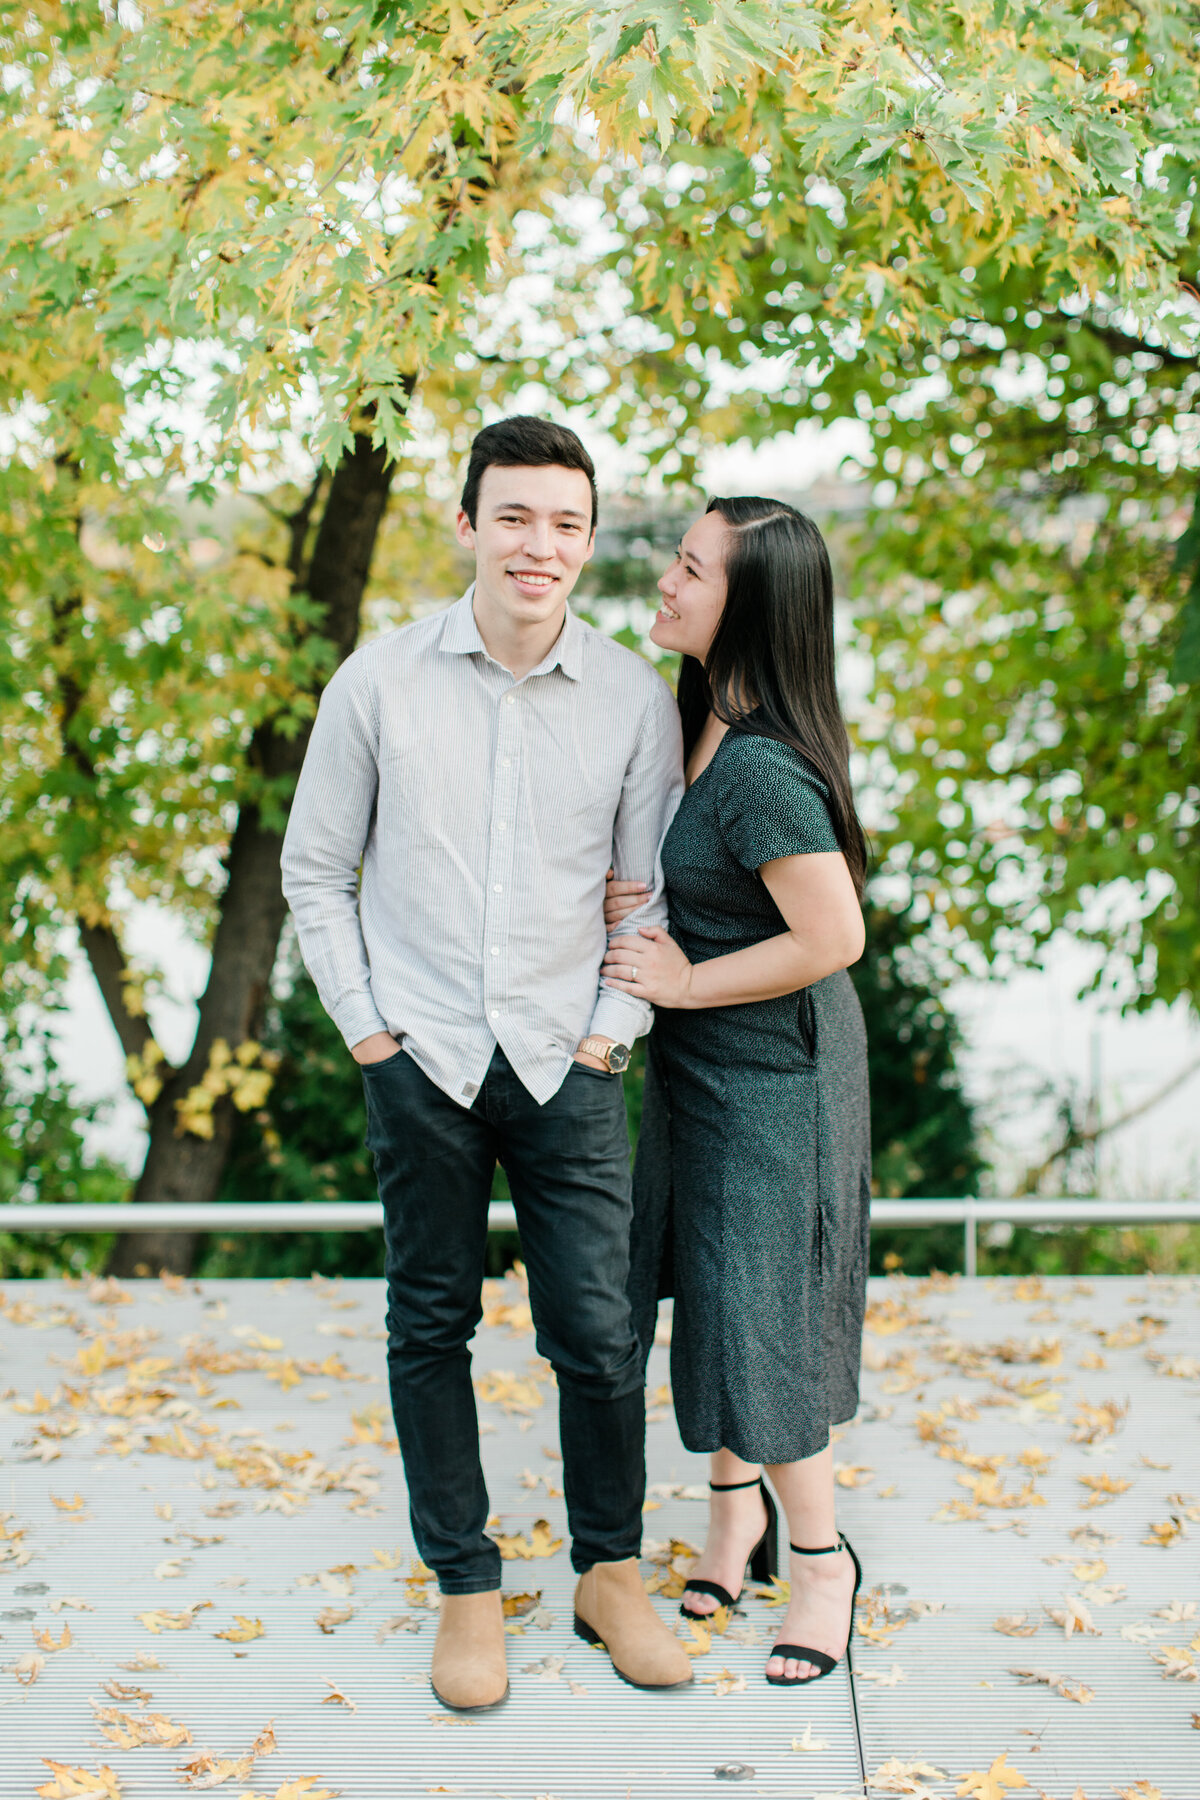 Becky_Collin_Navy_Yards_Park_The_Wharf_Washington_DC_Fall_Engagement_Session_AngelikaJohnsPhotography-7670